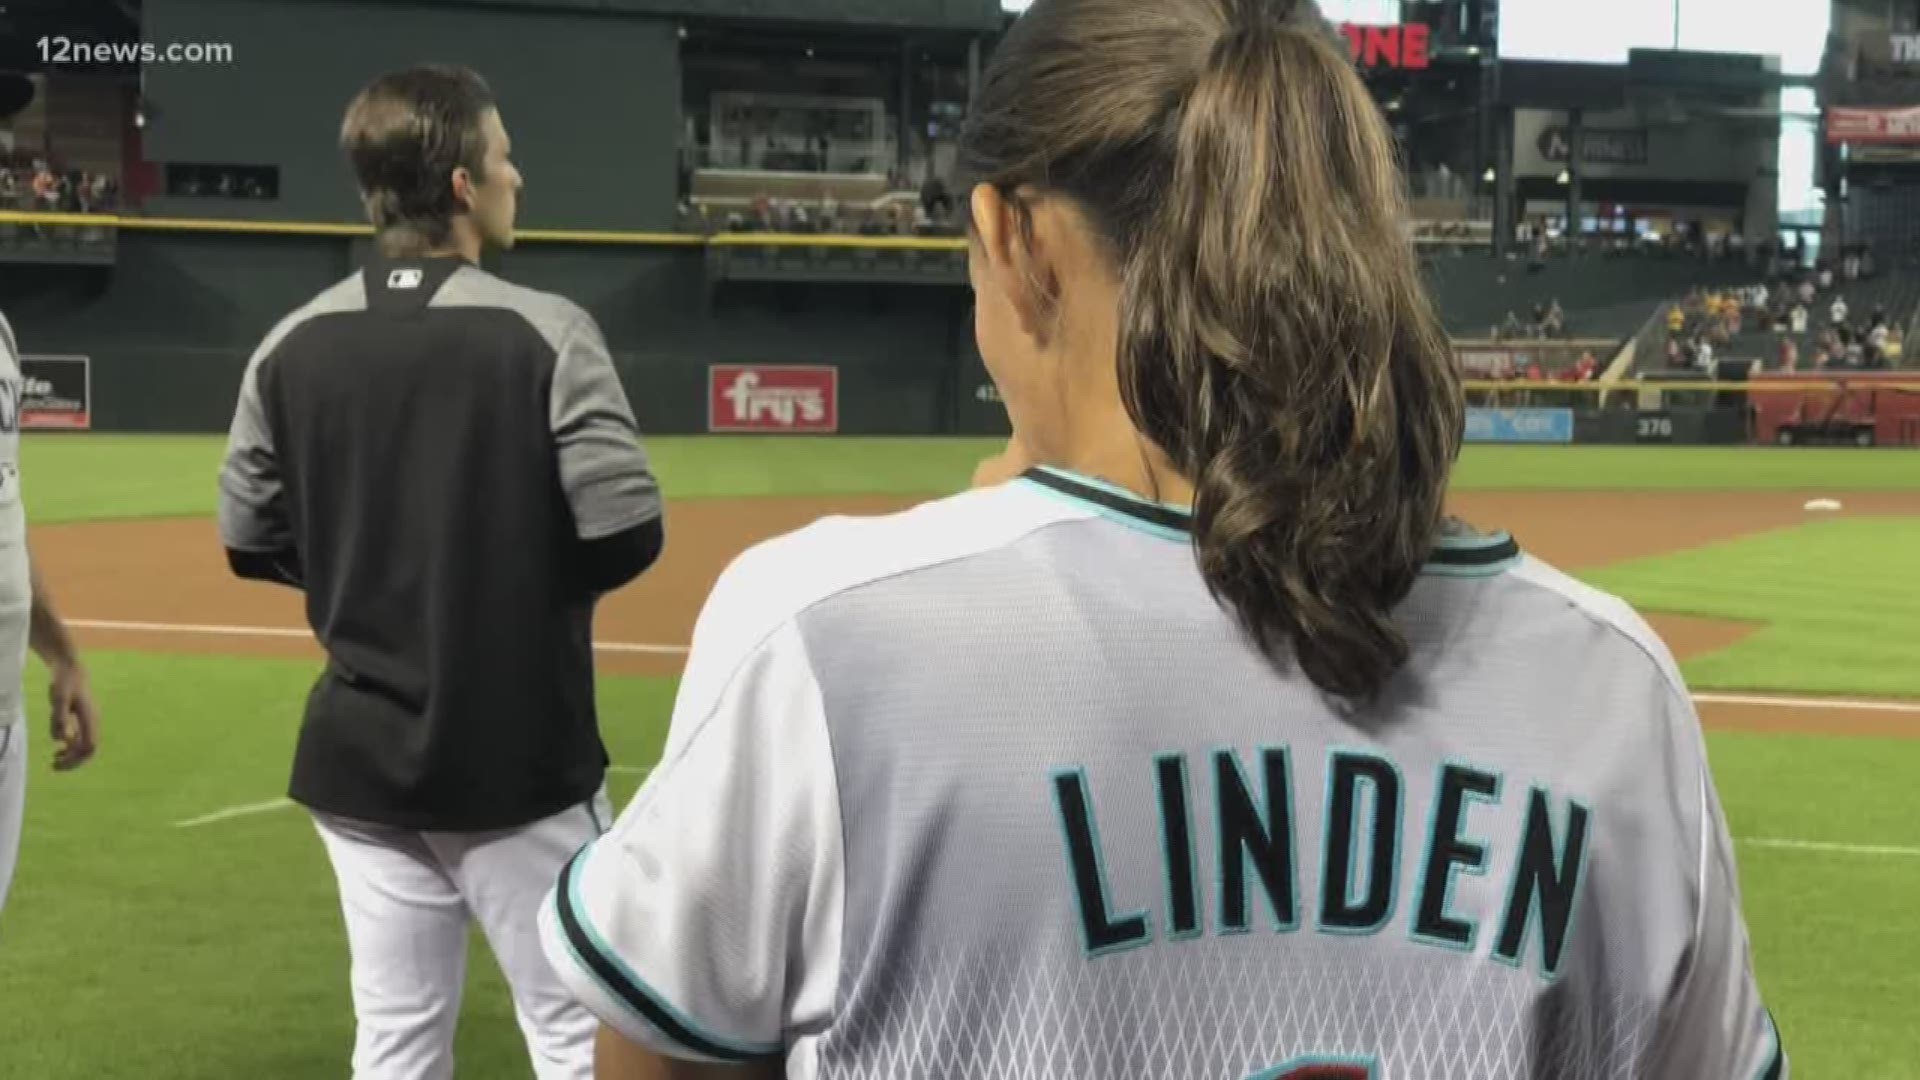 Desiree Linden, an ASU grad and winner of the 2018 Boston Marathon, may be little but she is fierce. From winning the marathon to throwing out the first pitch team 12's Ryan Cody catches up with her to see what's next.